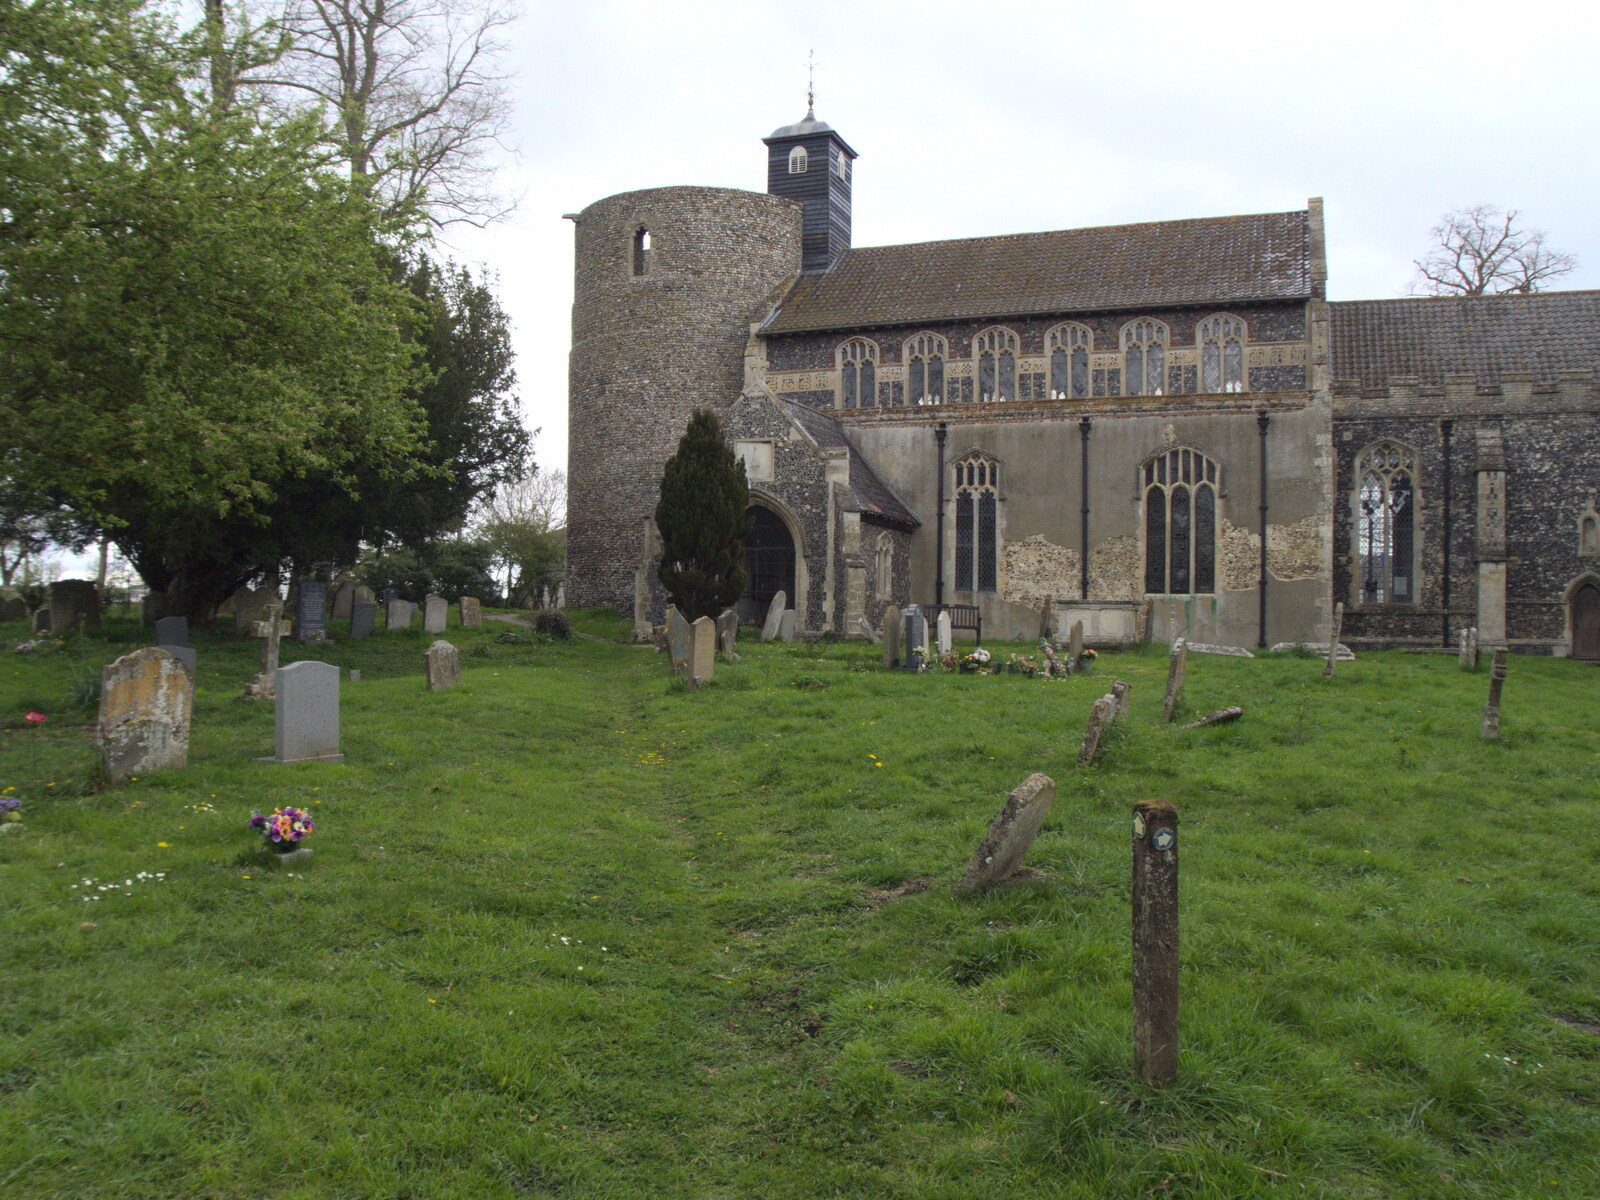 The church of St. Mary the Virgin, Wortham from Bike Rides and a Visit to the Farm Shop, Eye, Suffolk -  25th April 2023